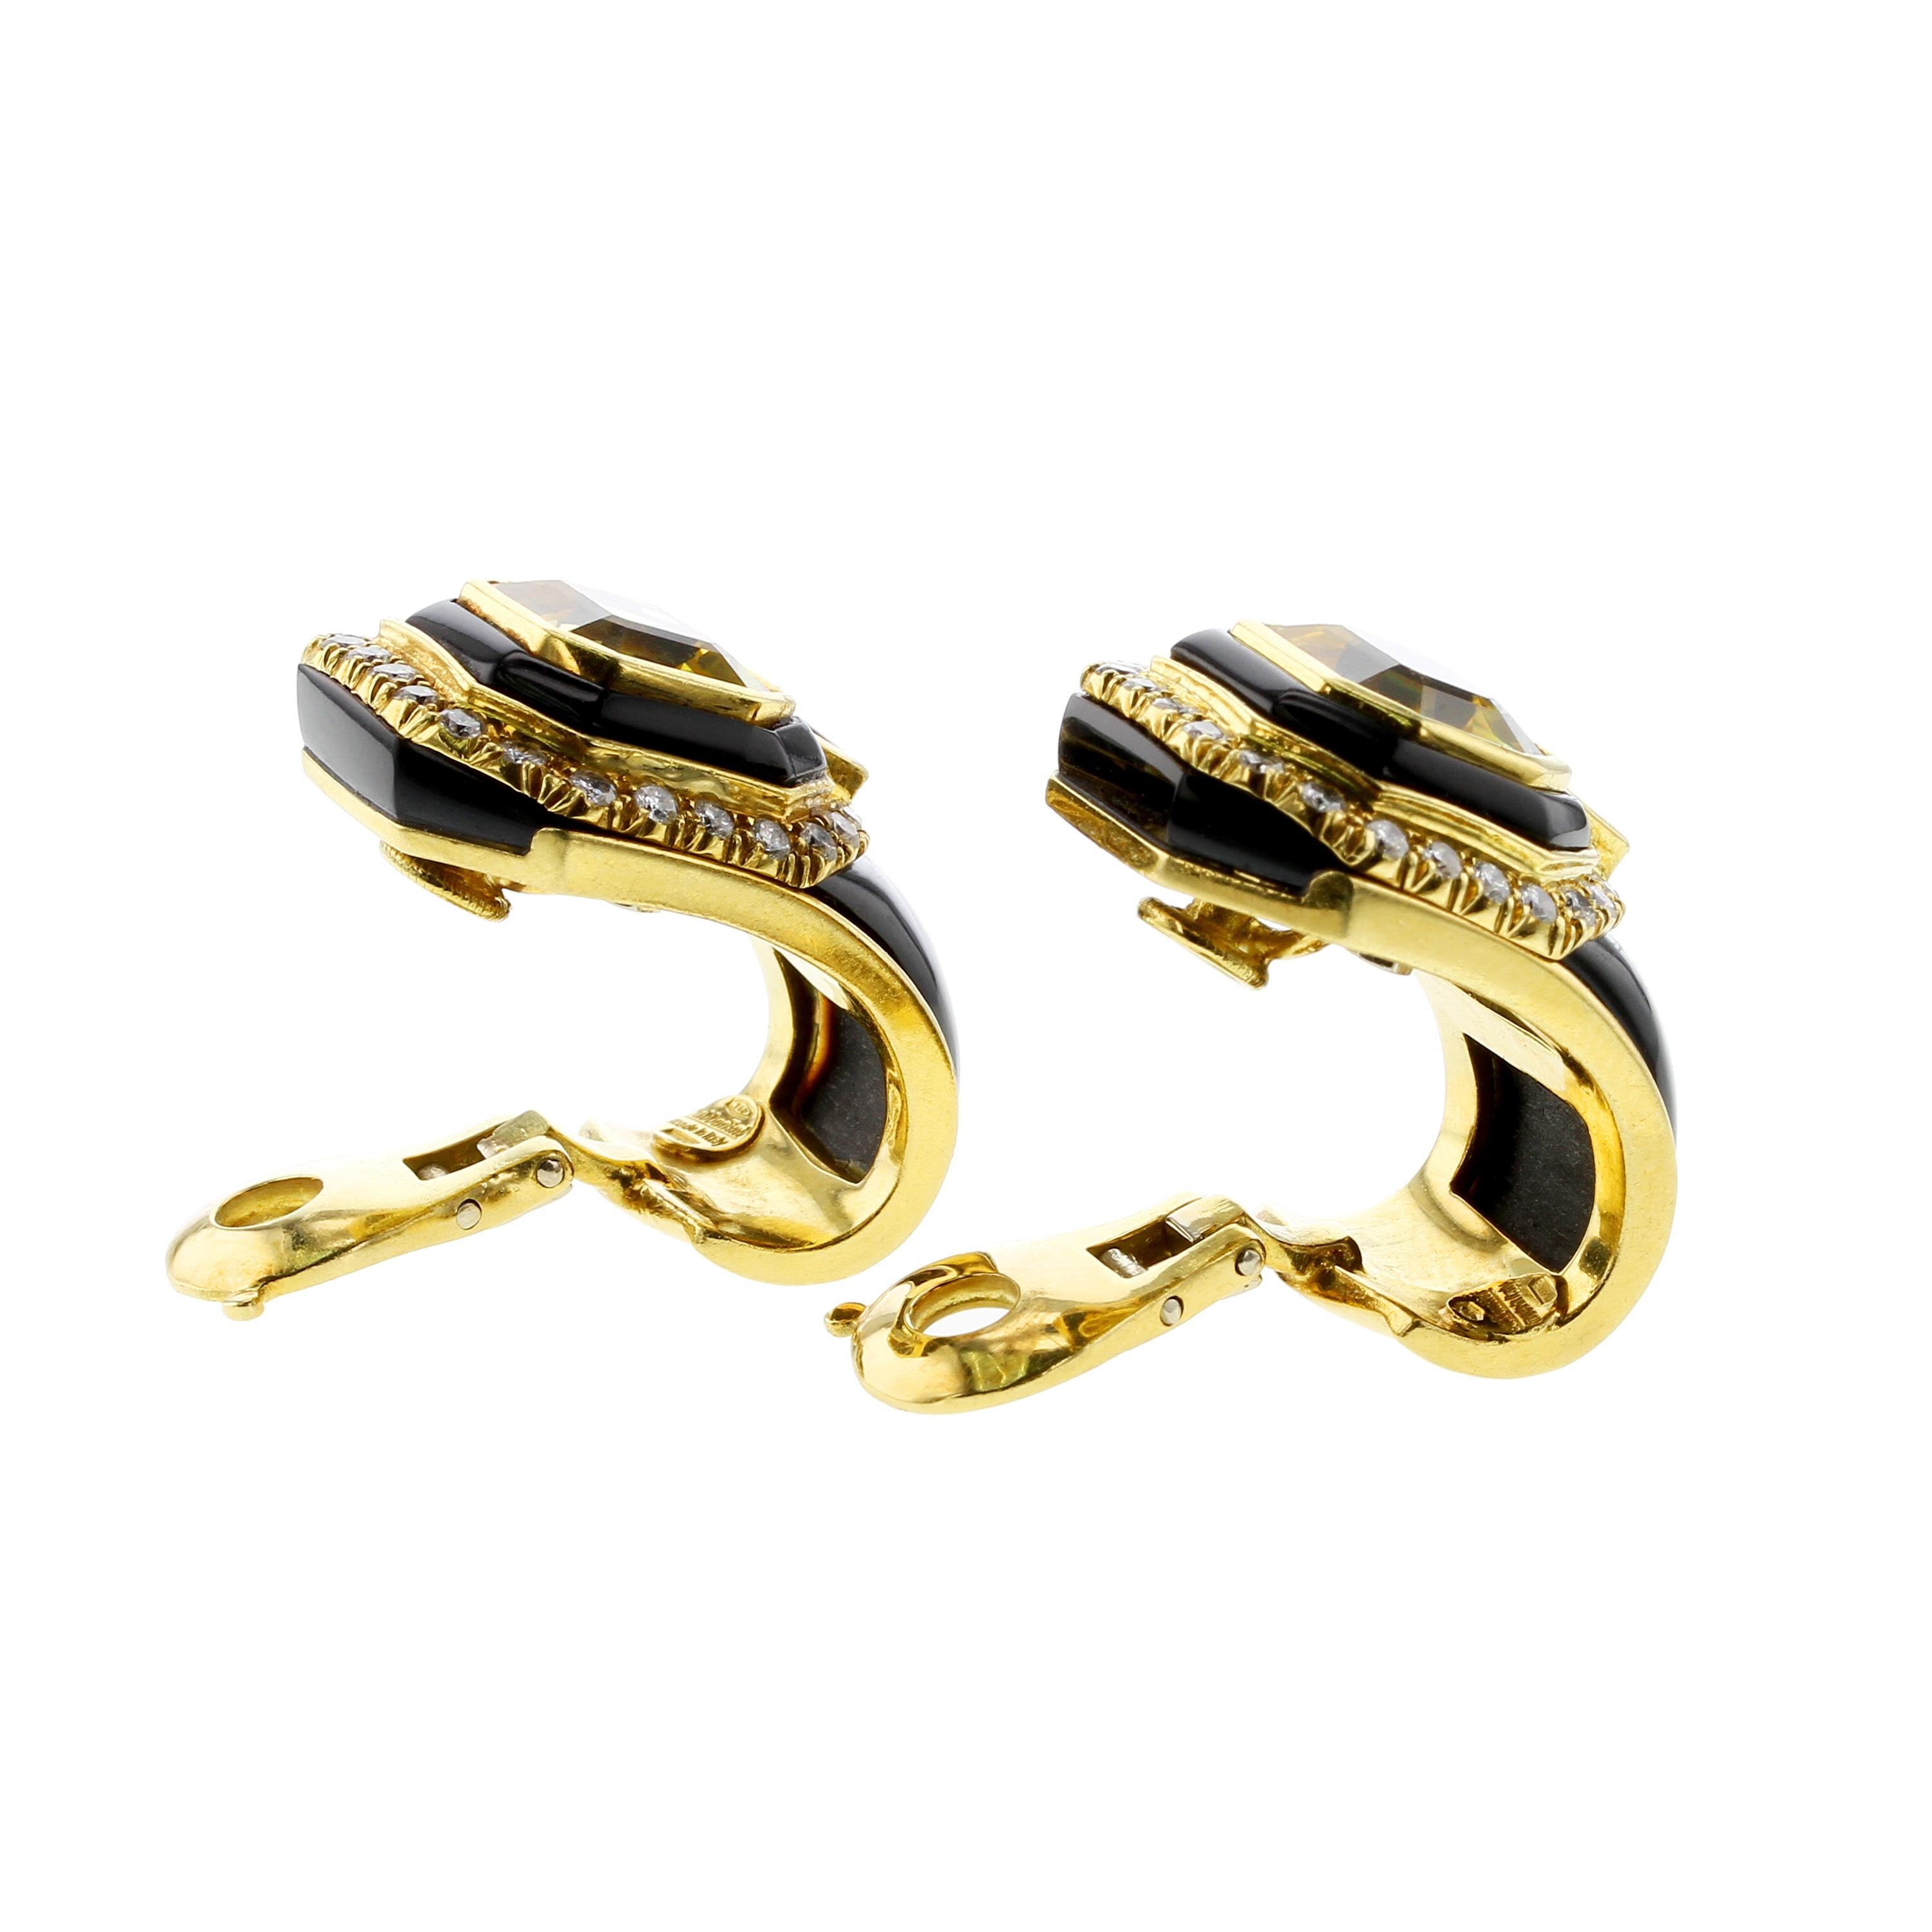 An elegant and beautiful pair of octagonal shape step-cut yellow sapphire clip-on earrings set in 18kt yellow gold. Each sapphire weighs approximately nine carats, bordered with black onyx, and further clustered with white round, brilliant-cut